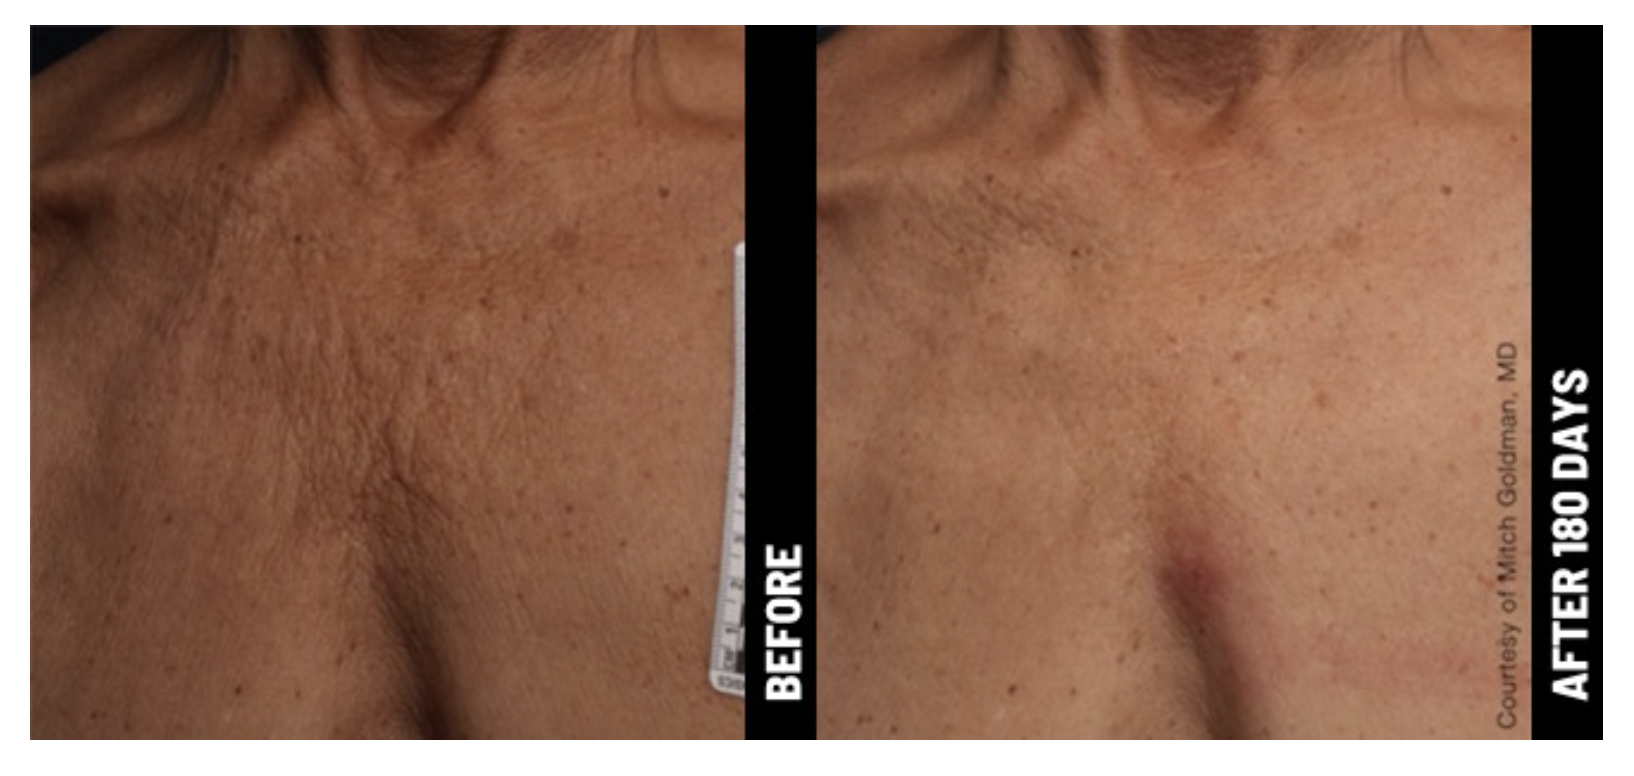 before-and-after-ultrasound-treatment-neck.png